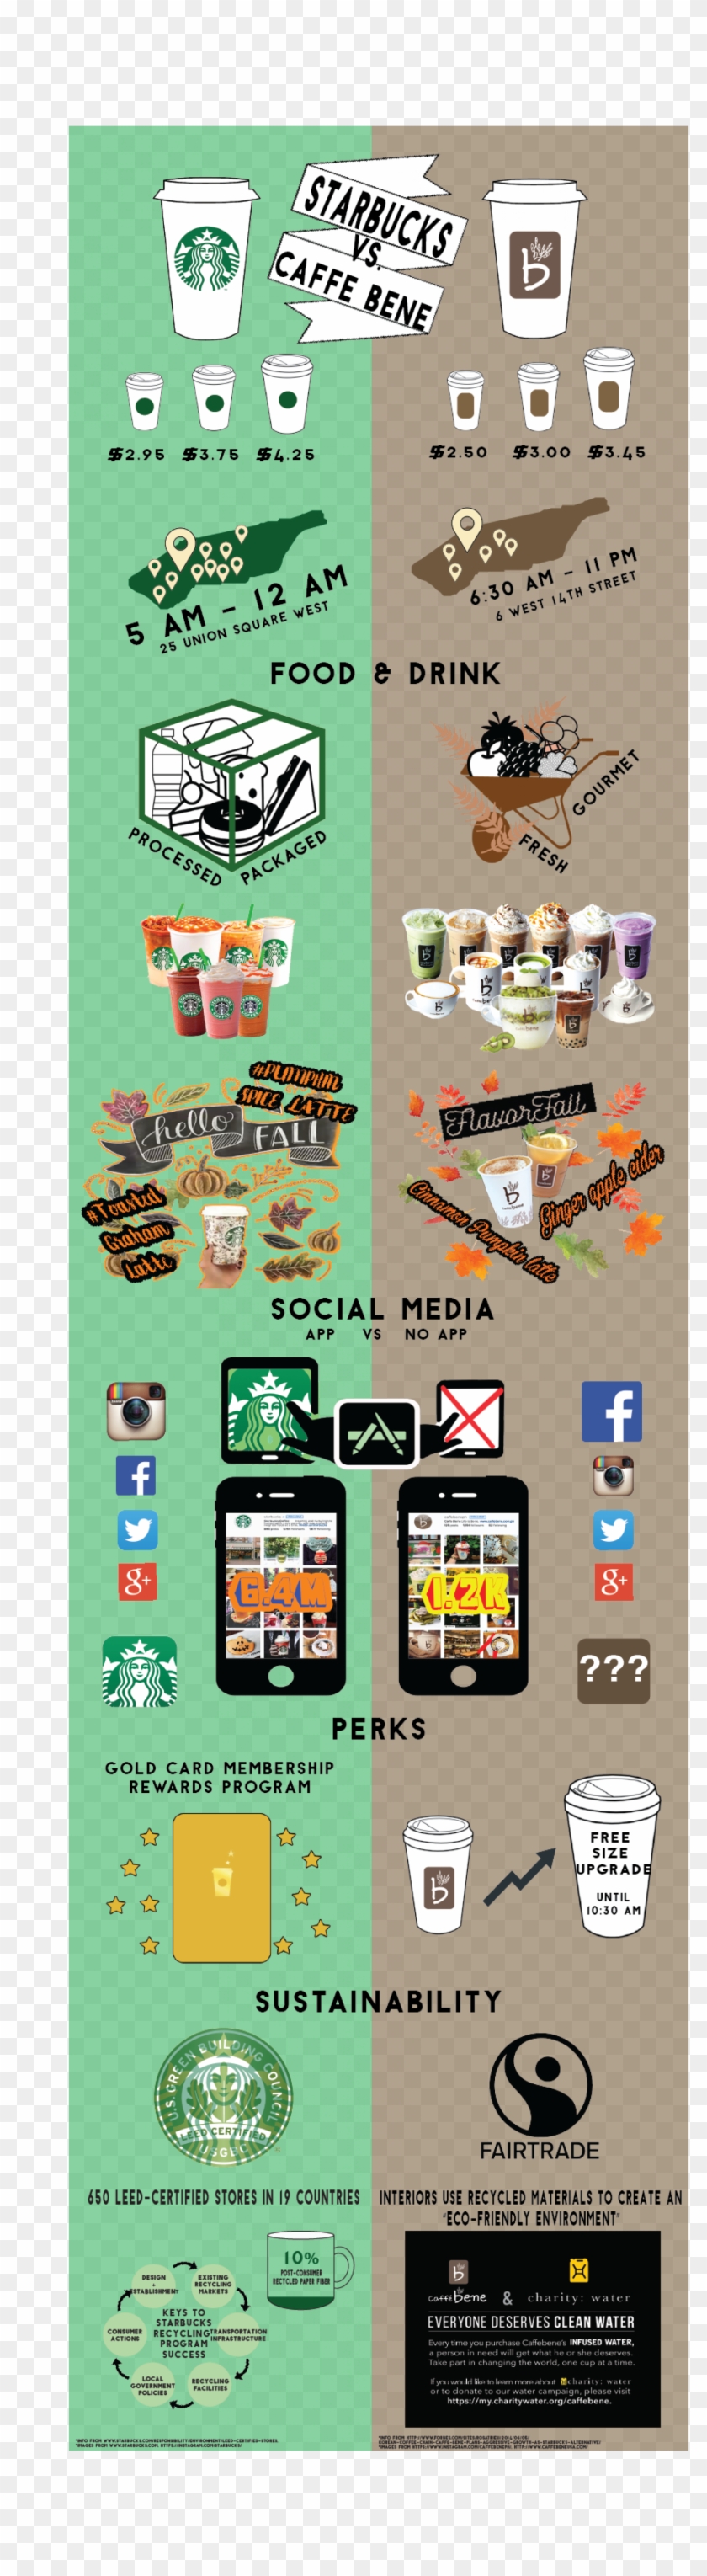 Caffe Bene Infographic Clipart #519879